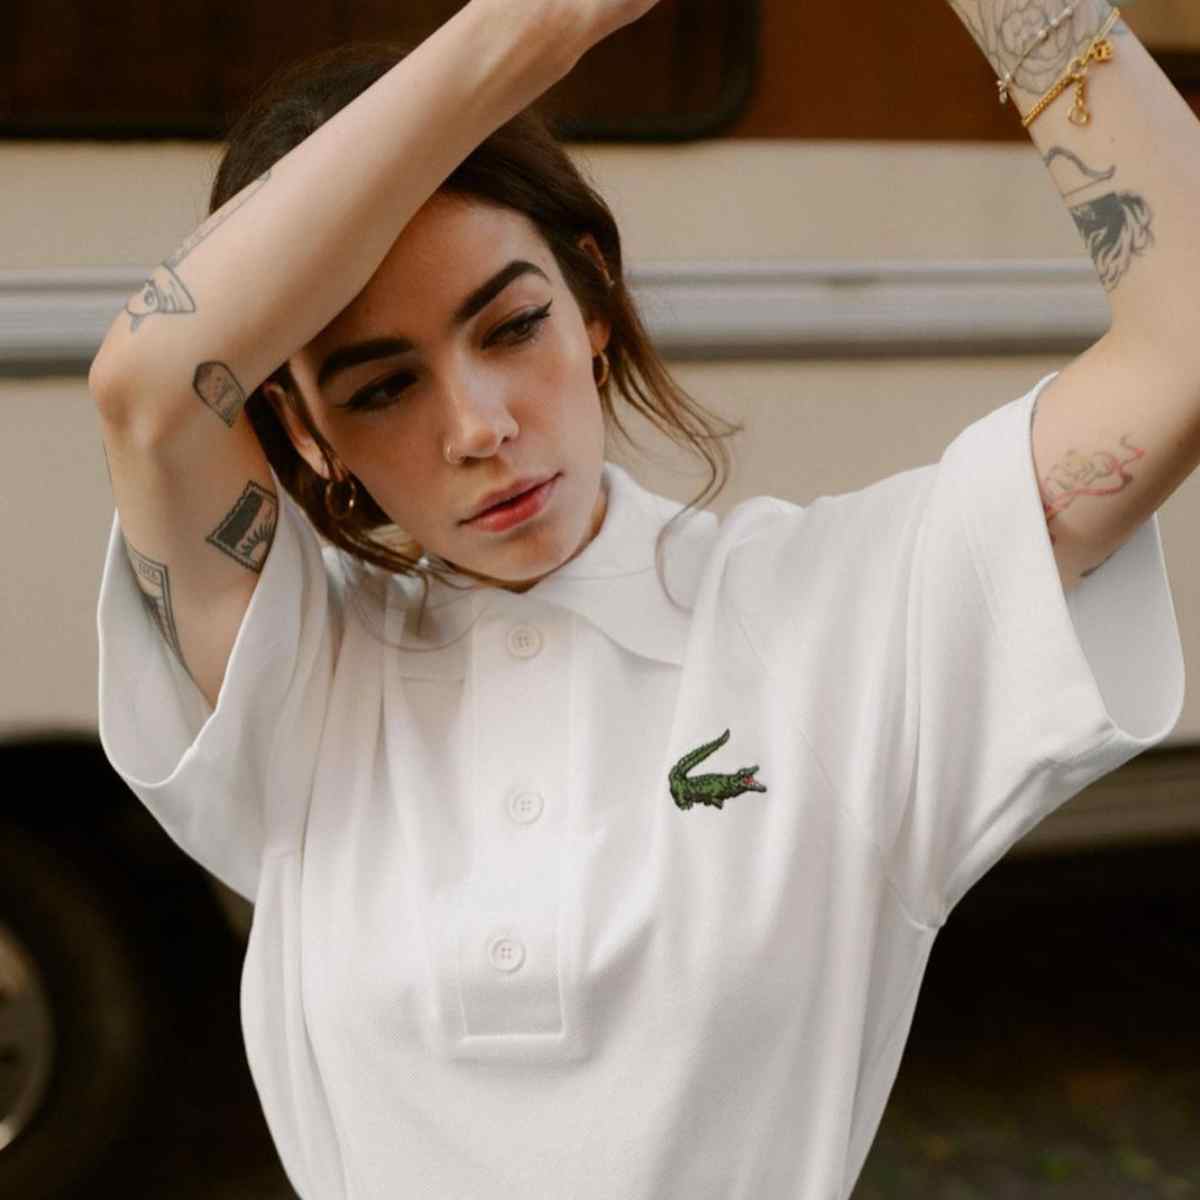 Why is Lacoste popular? 